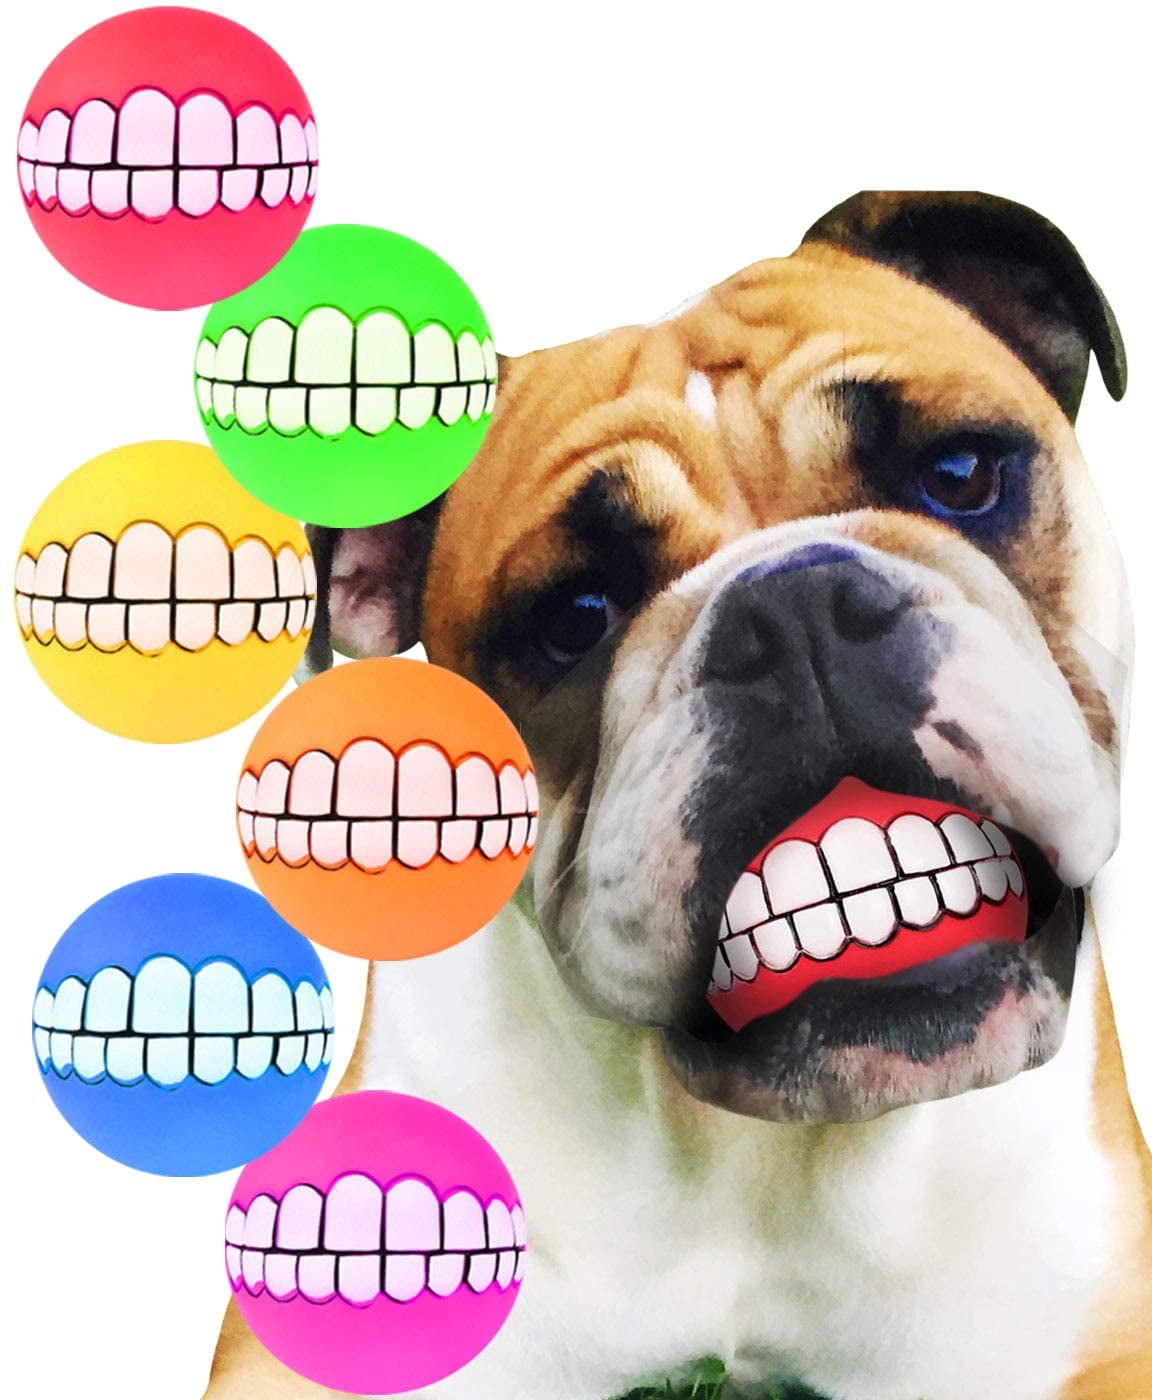 Hawwwy Funny Dog Teeth Ball for Dogs, Fun Pet Toy with Human Smile Design  and Squeaker 